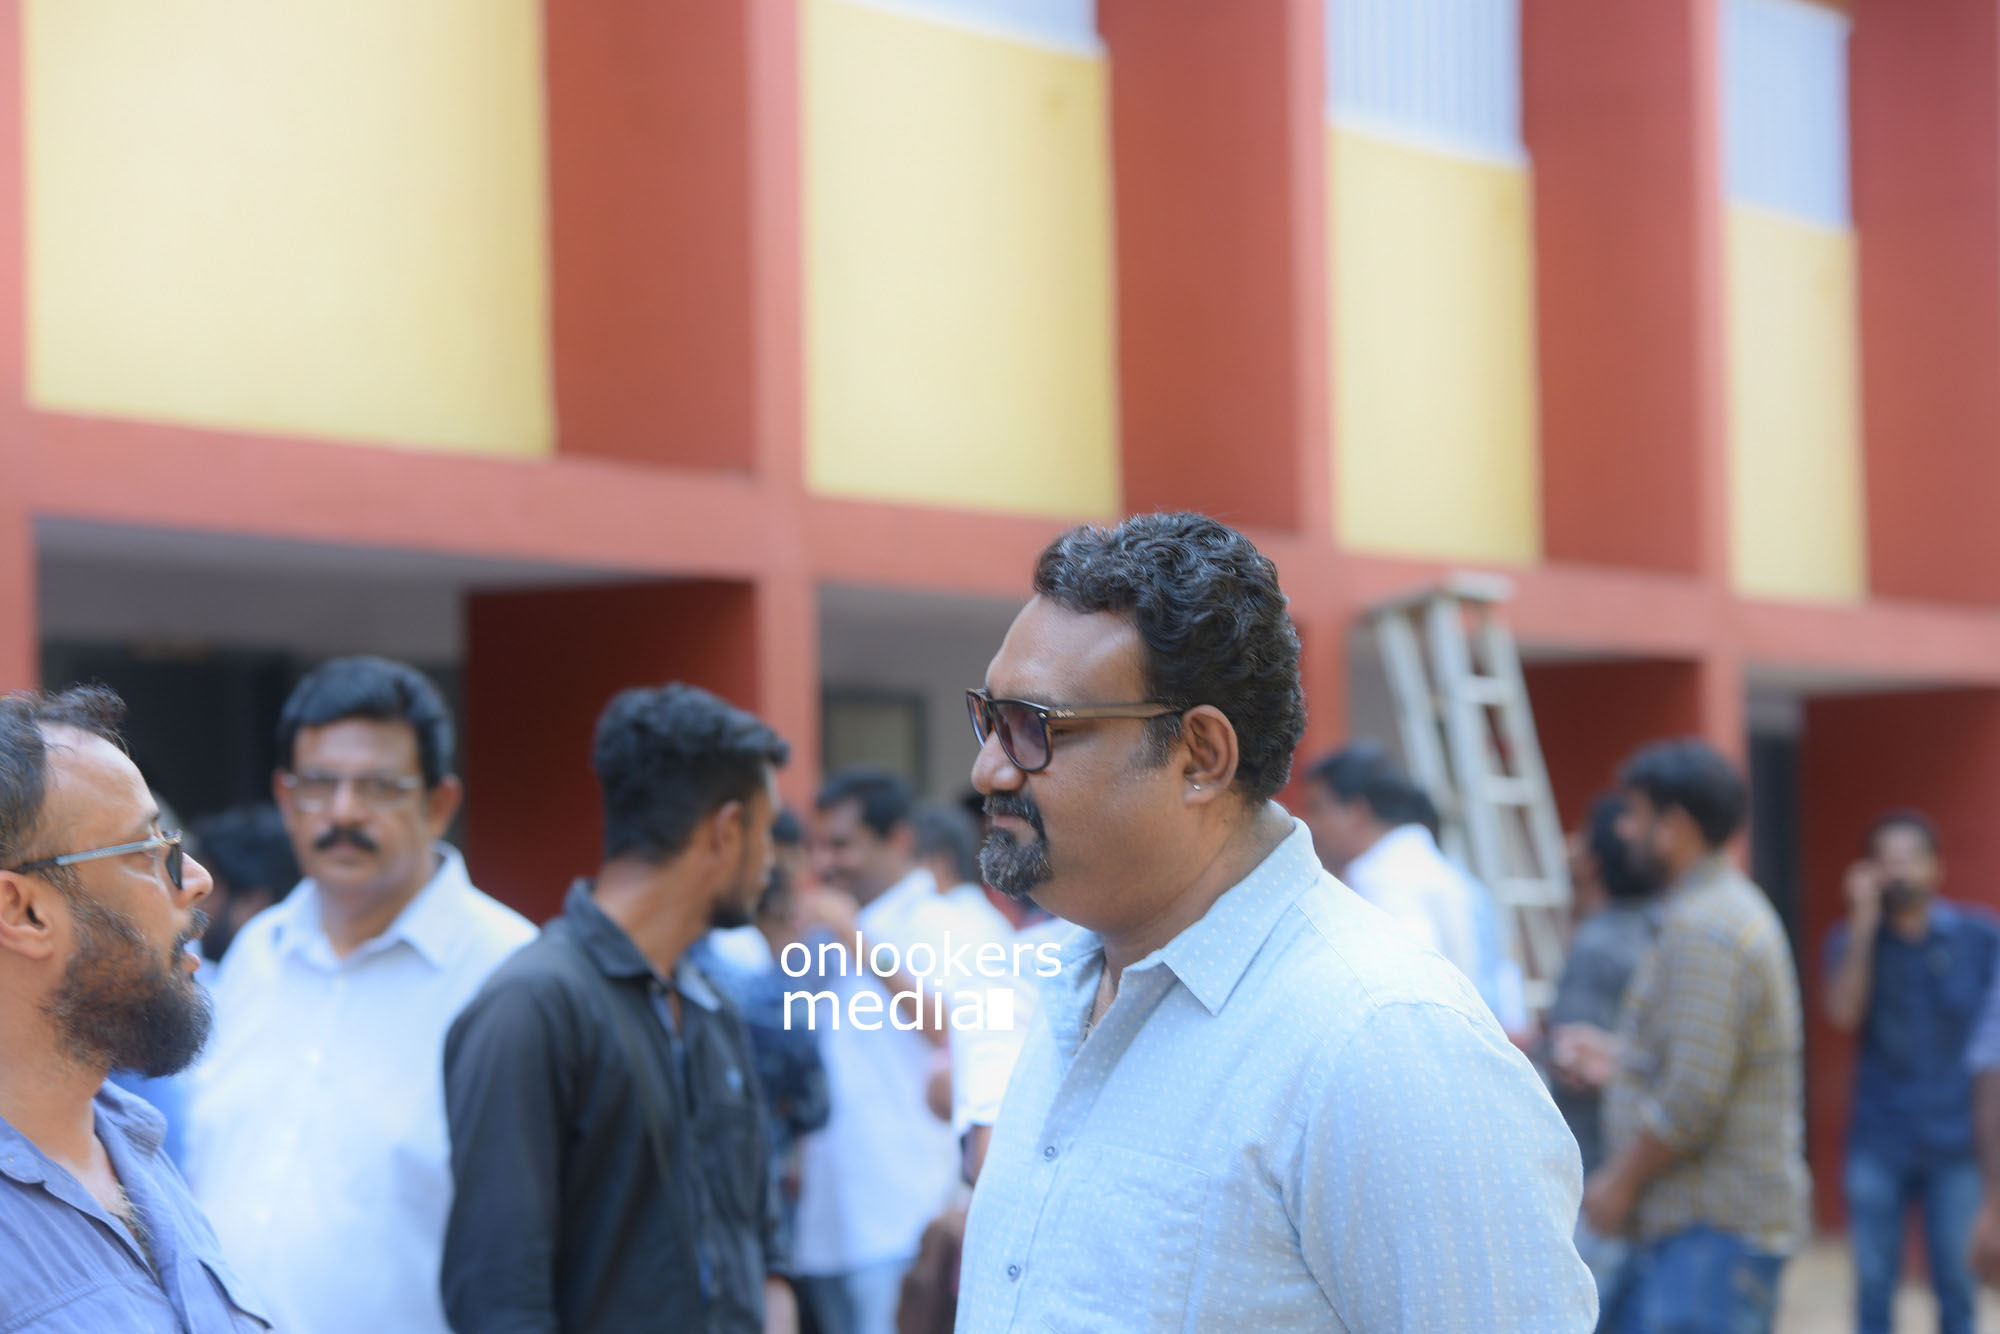 http://onlookersmedia.in/wp-content/uploads/2017/05/Lal-Jose-Mohanlal-movie-Pooja-stills-images-photos-70.jpg